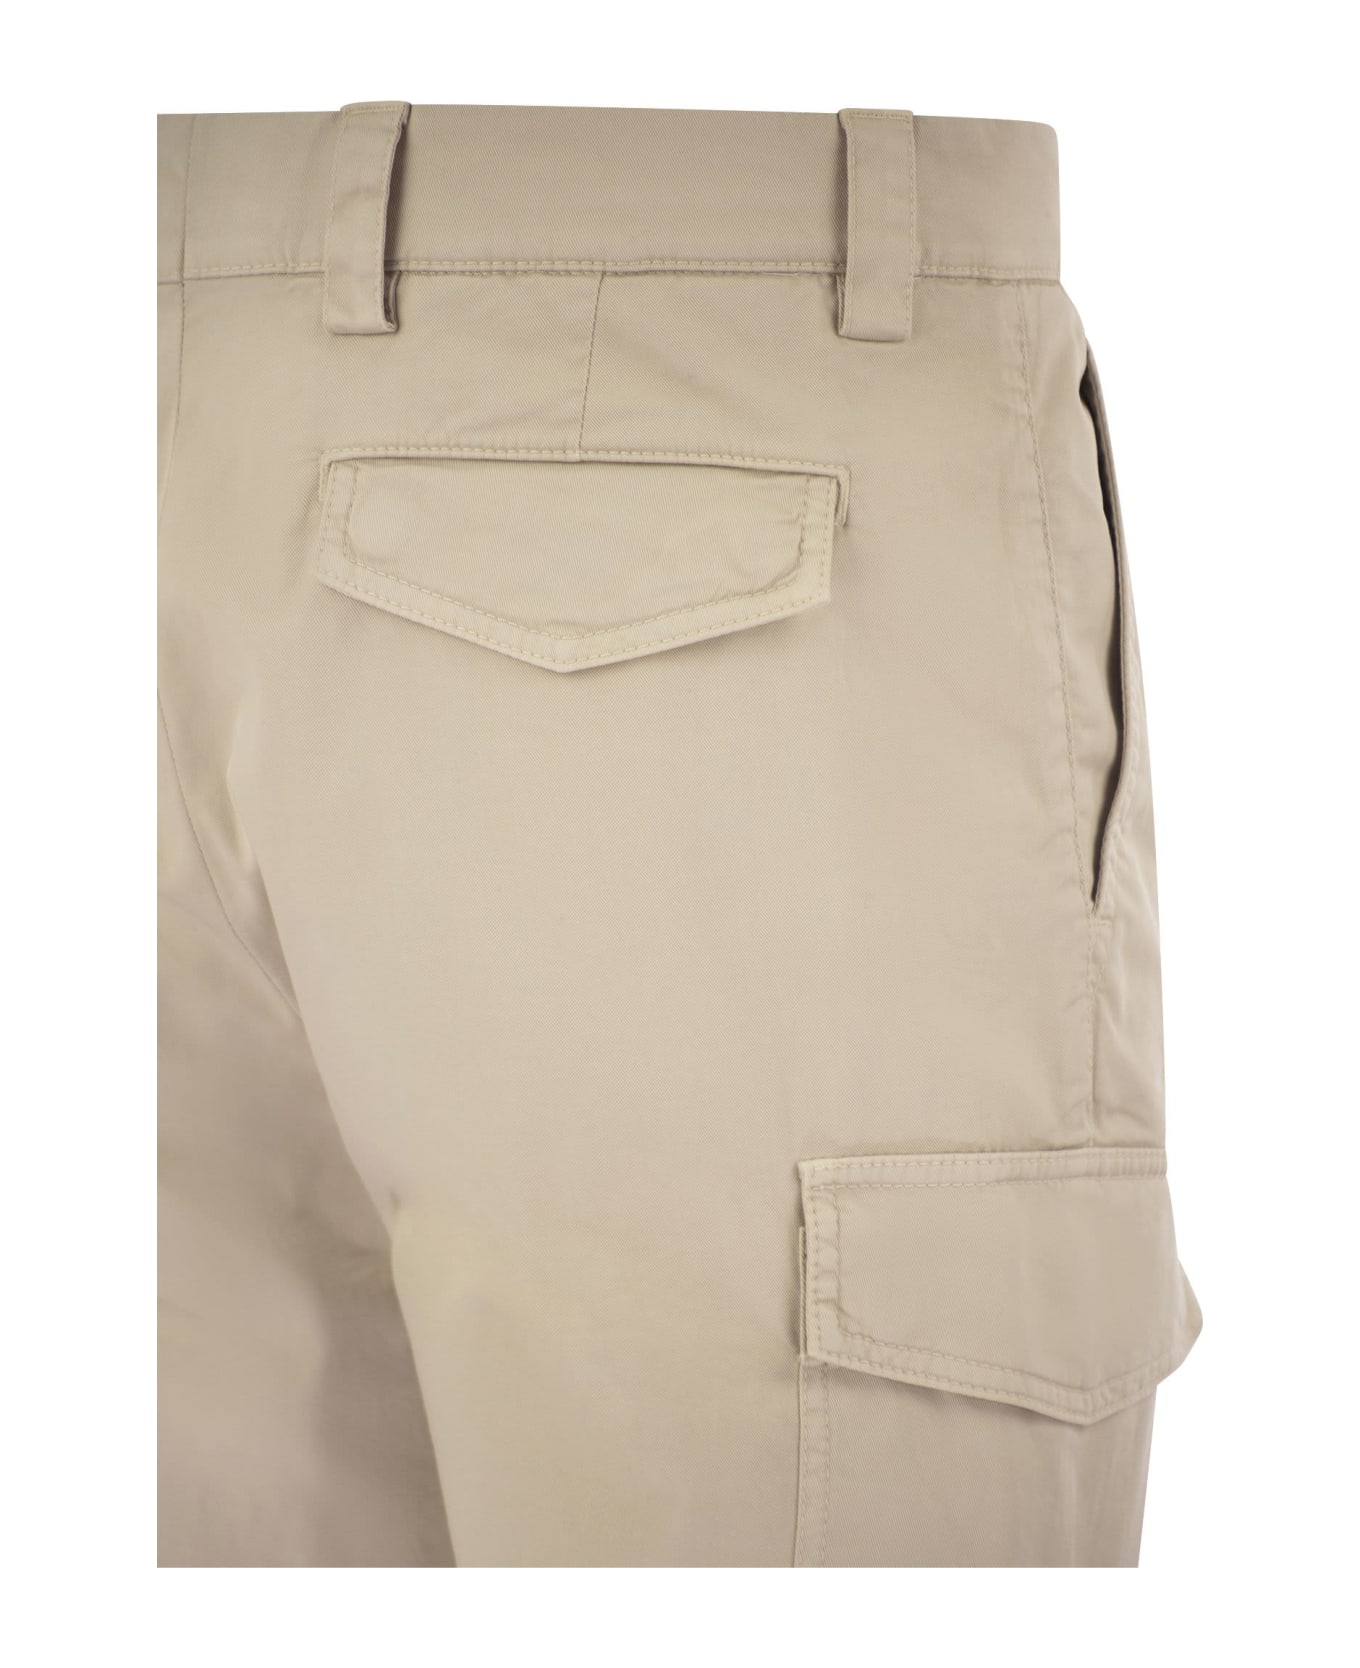 Brunello Cucinelli Garment-dyed Leisure Fit Trousers - Butter